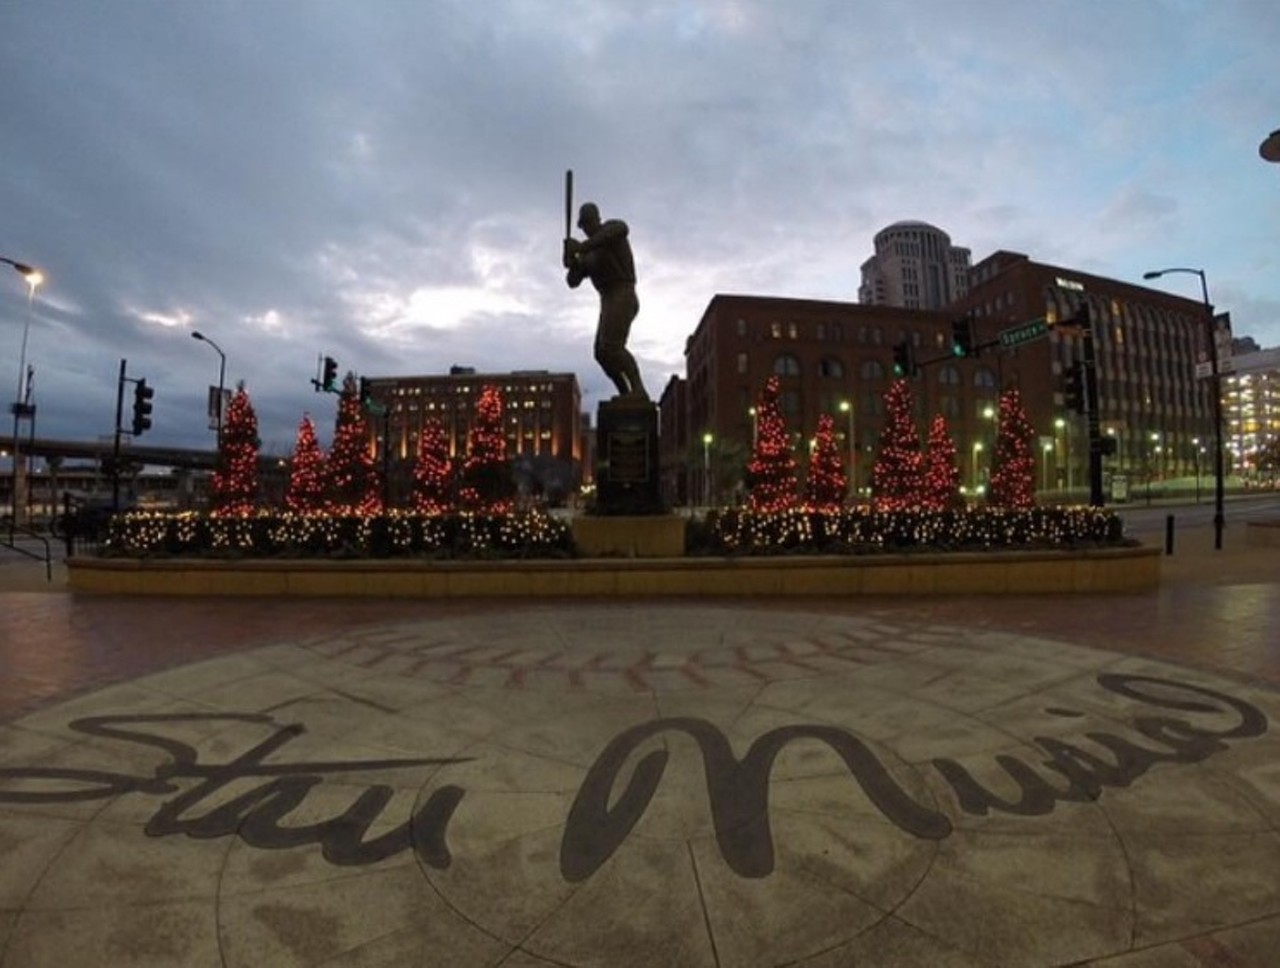 The Stan Musial statue
Stan is such the man that he deserves his own picture -- separate from the stadium. Photo courtesy of Instagram / someguyfromstl.